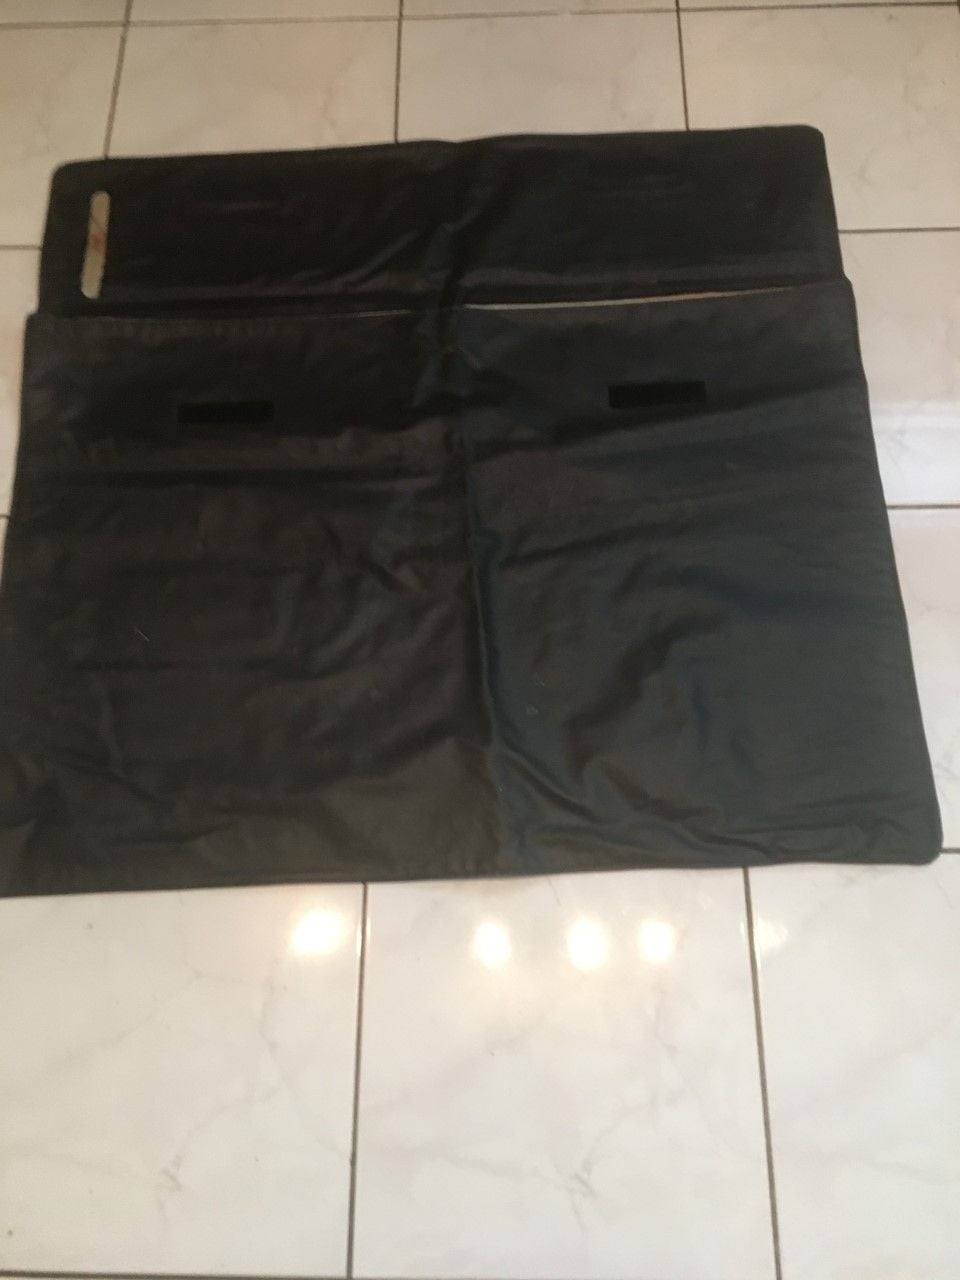 Accessories - 1st Generation 79-85 RX7 Sunroof Storage Cover - Used - 1979 to 1985 Mazda RX-7 - Ottaws, ON K0A2T0, Canada